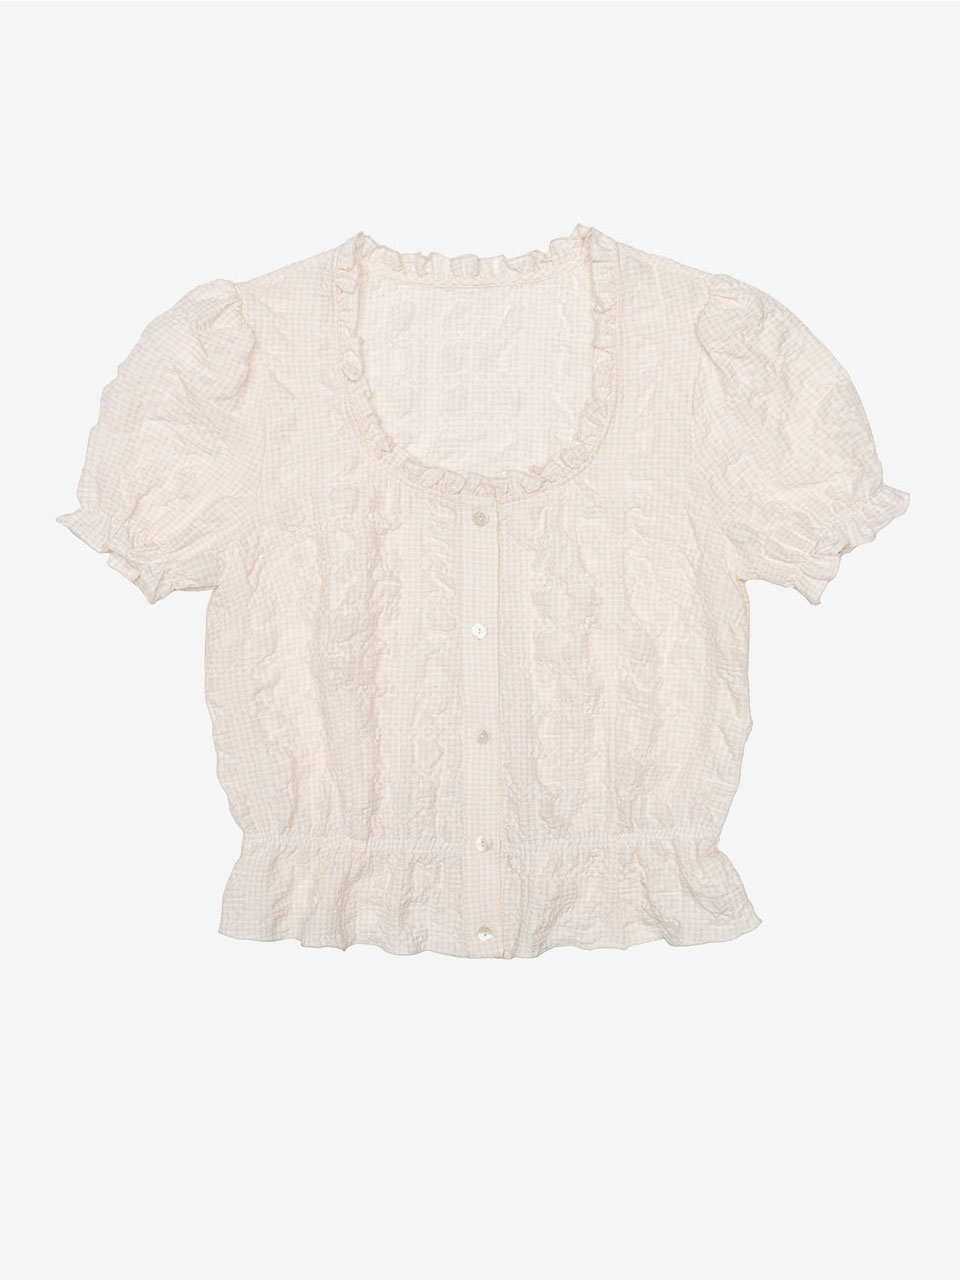 [22HS] CHECK PATTERN FRILL BLOUSE - BEIGE